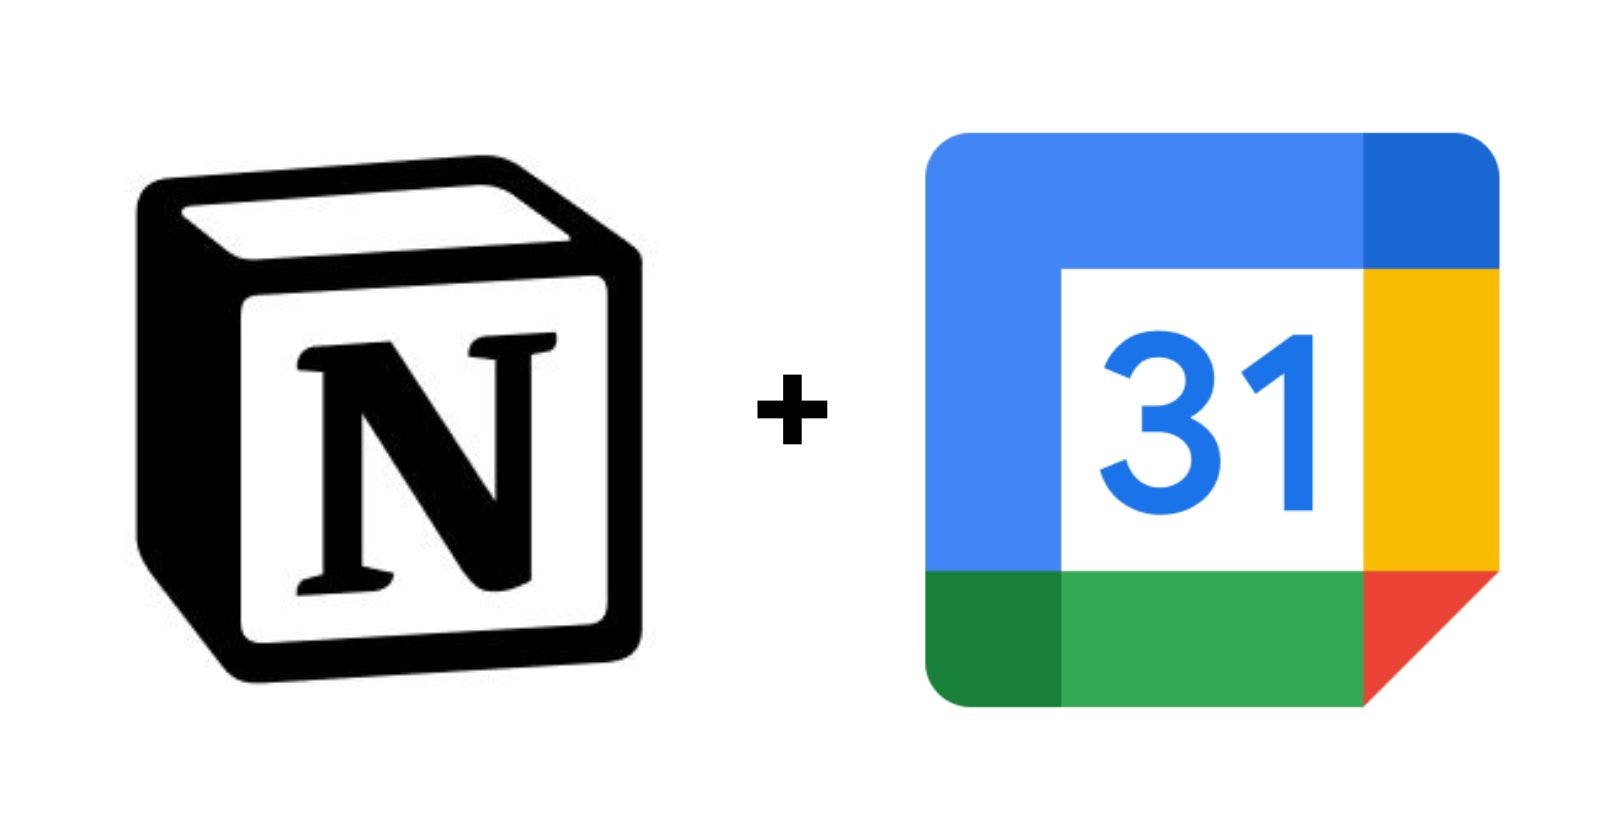 How to Embed Google Calendar in Notion